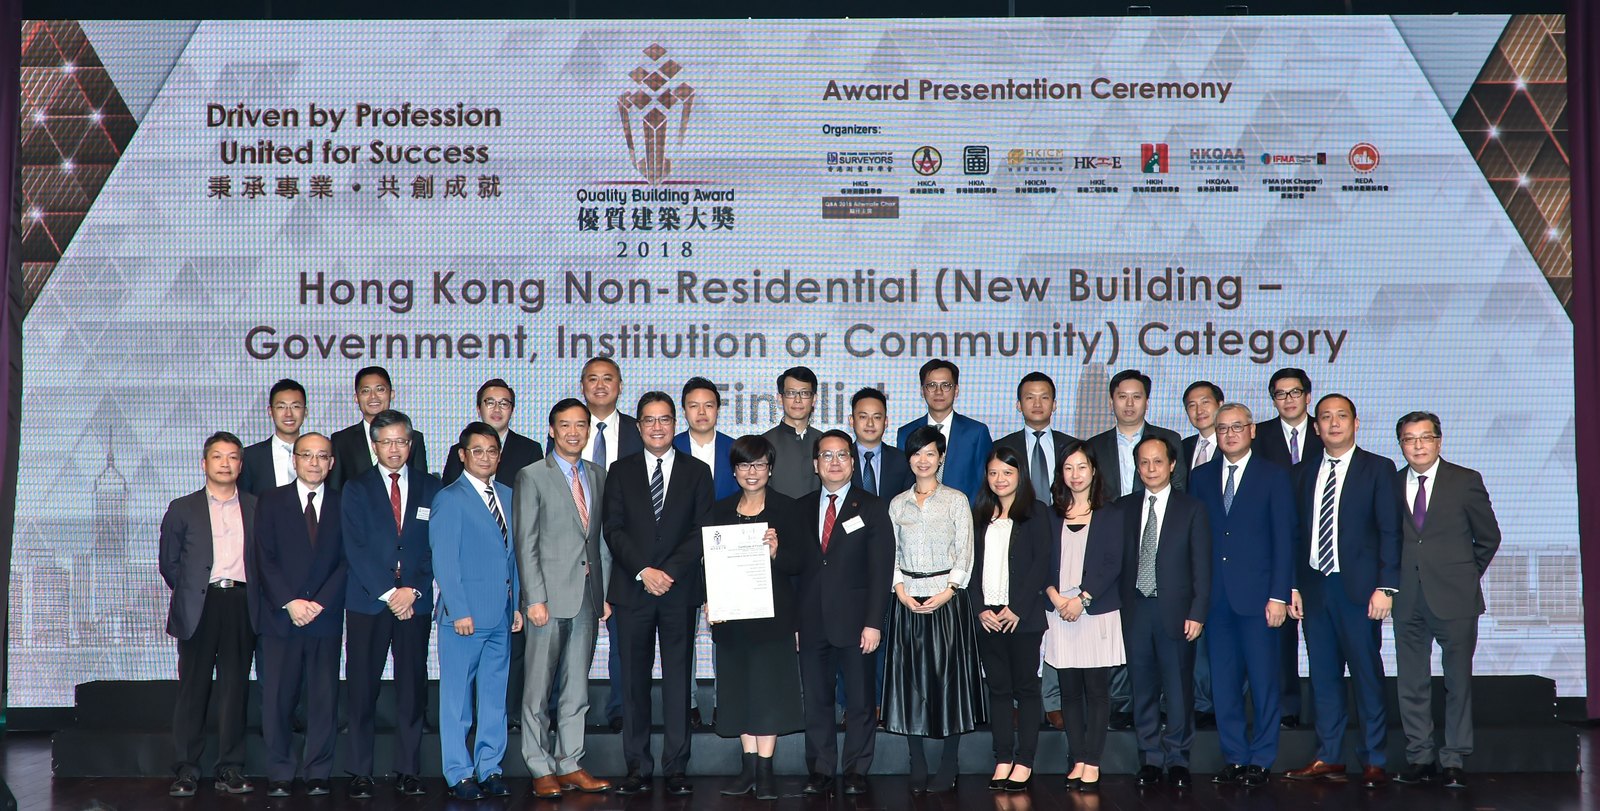 Project team of Reprovisioning the Yau Ma Tei Police Station and the representatives of Architectural Services Department receive the award on stage